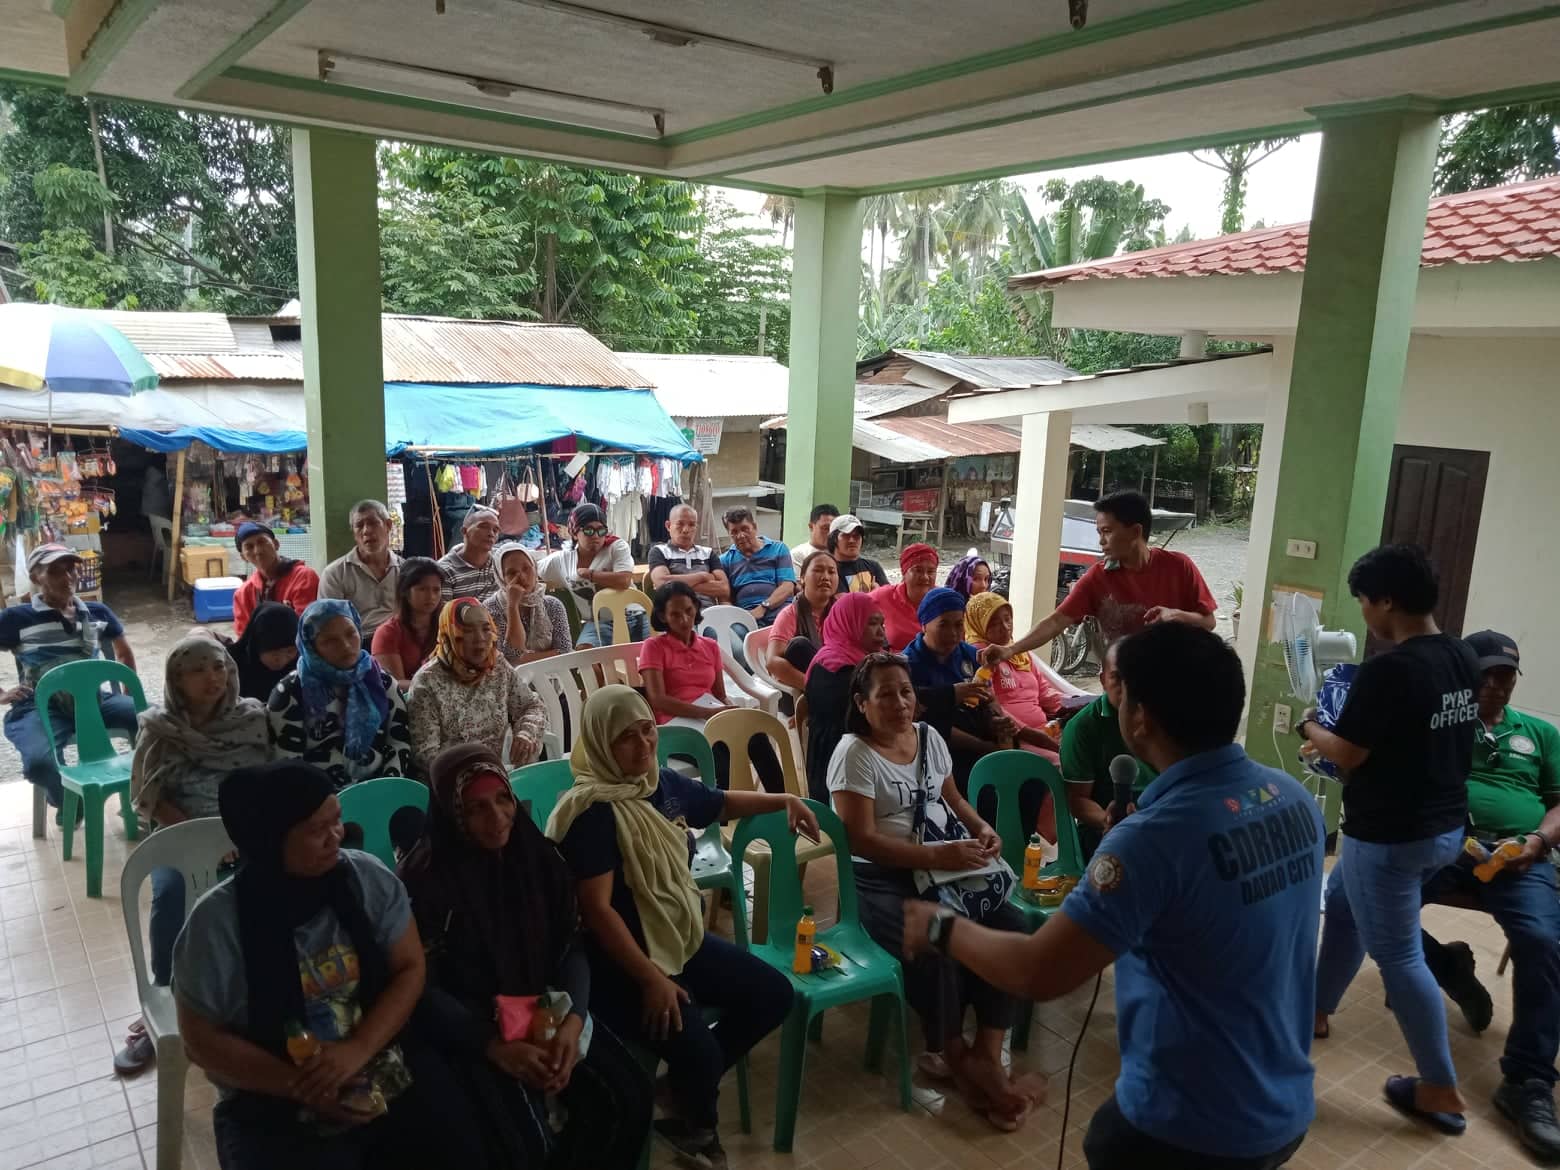 Flood Orientation and Drill conducted by the Davao City DRRMO personnel at Brgy. Waan, November 5, 2019.